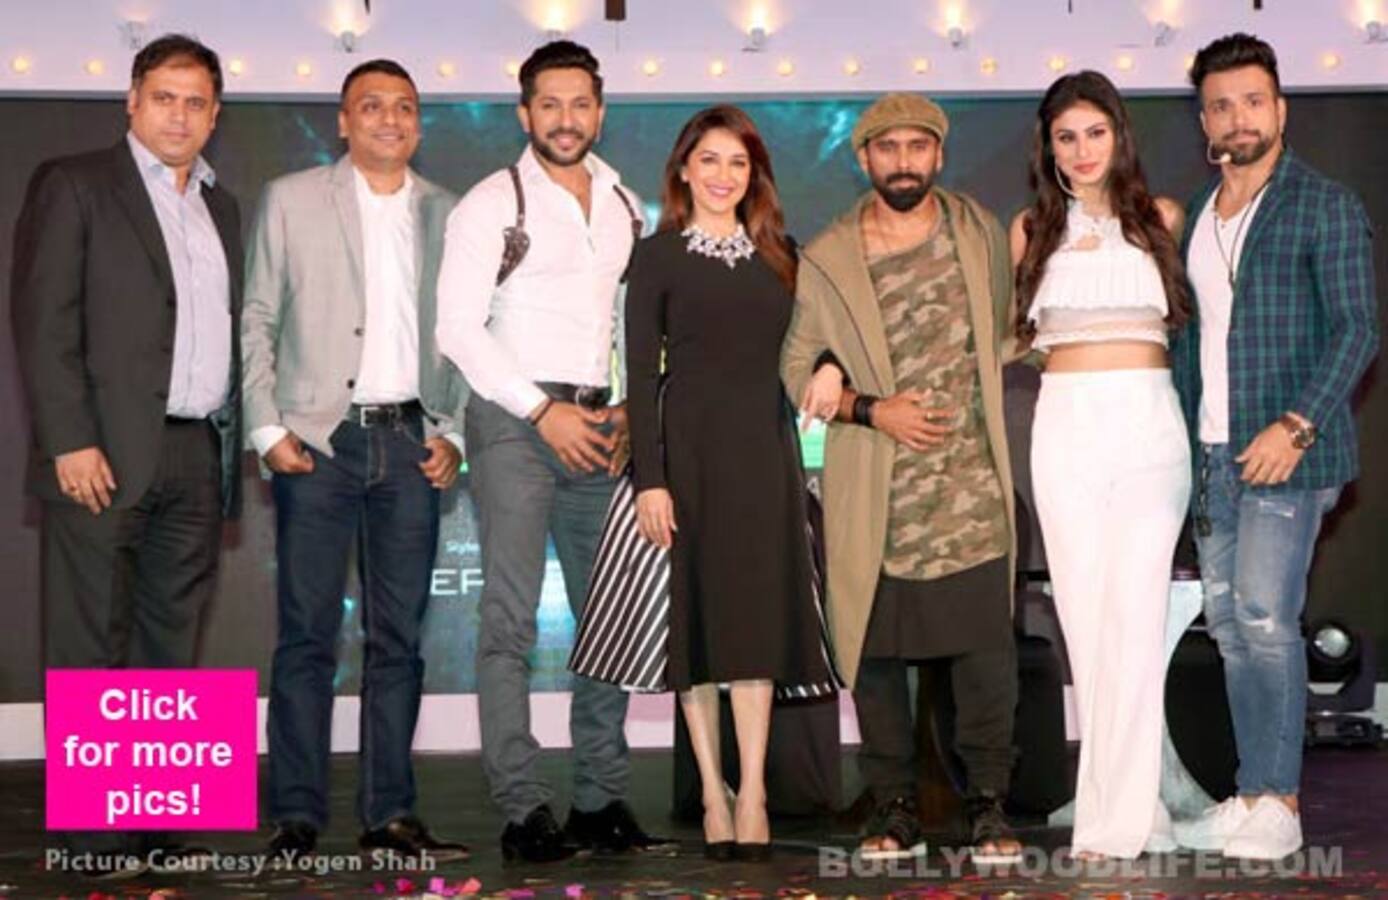 Madhuri Dixit Nene, Mouni Roy, Terence Lewis and Rithvik Dhanjani at the launch of So You Think You Can Dance – view pics!